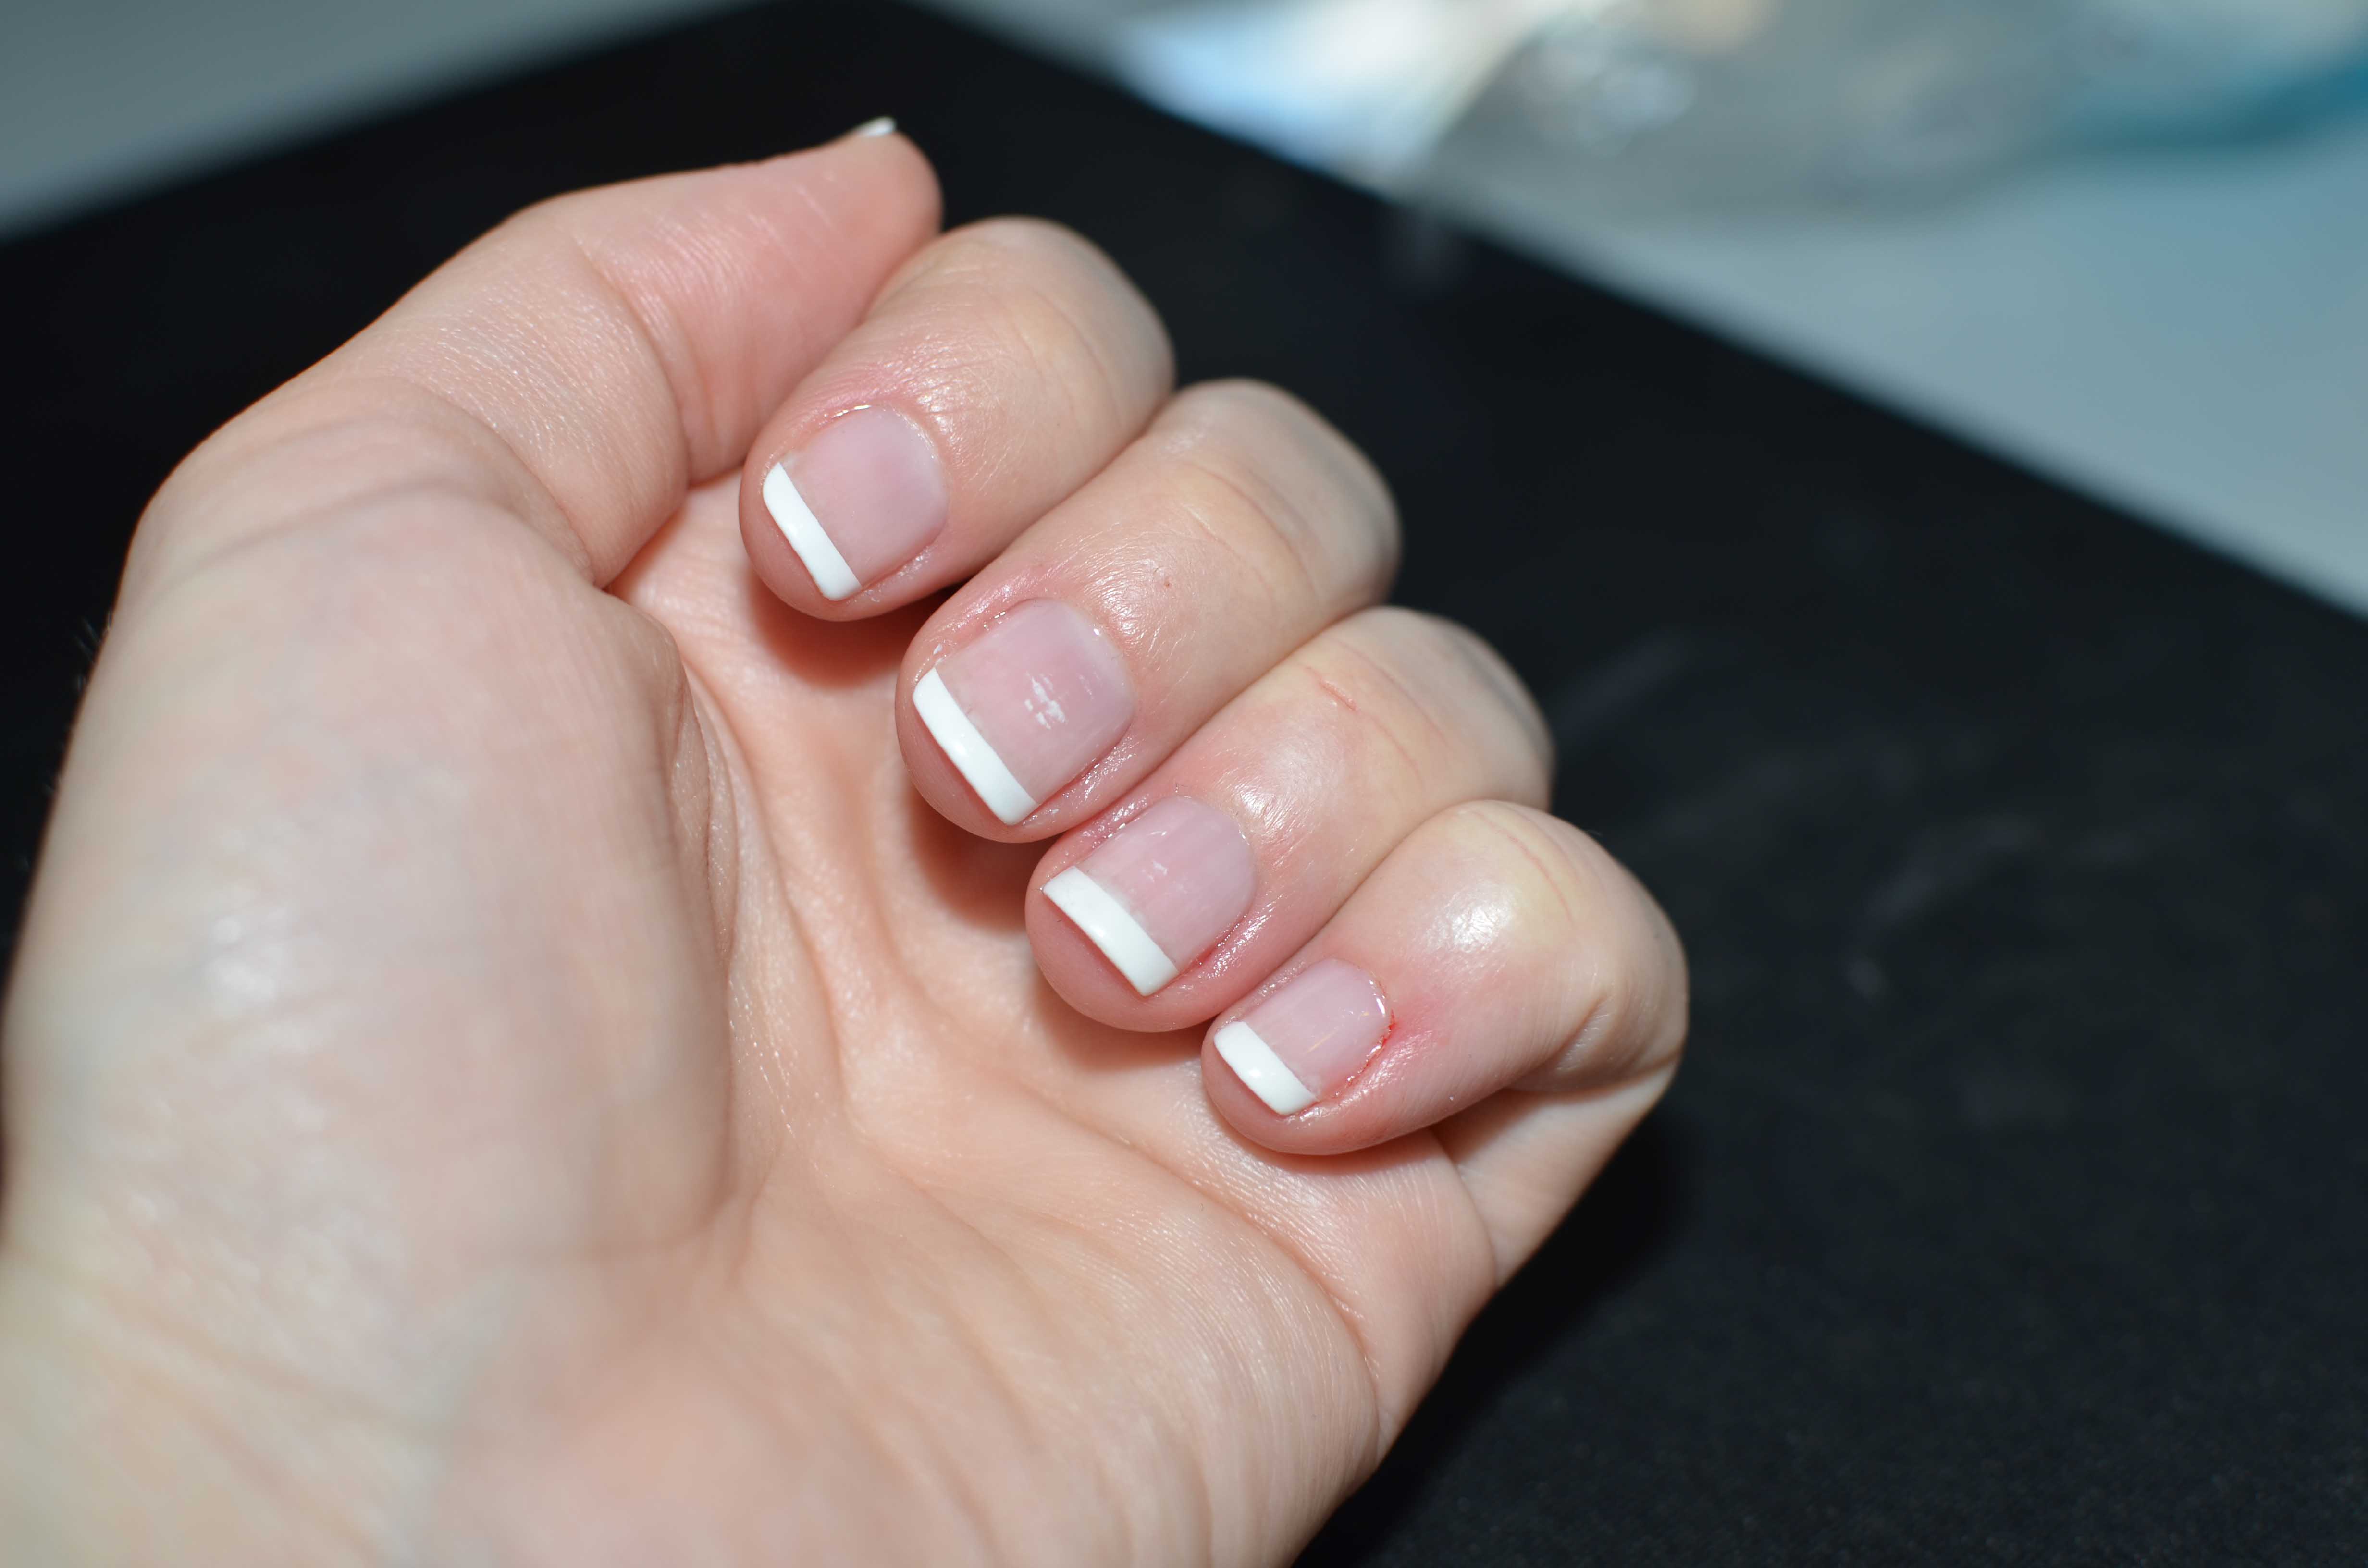 3. French Tip Gel Nails - wide 5